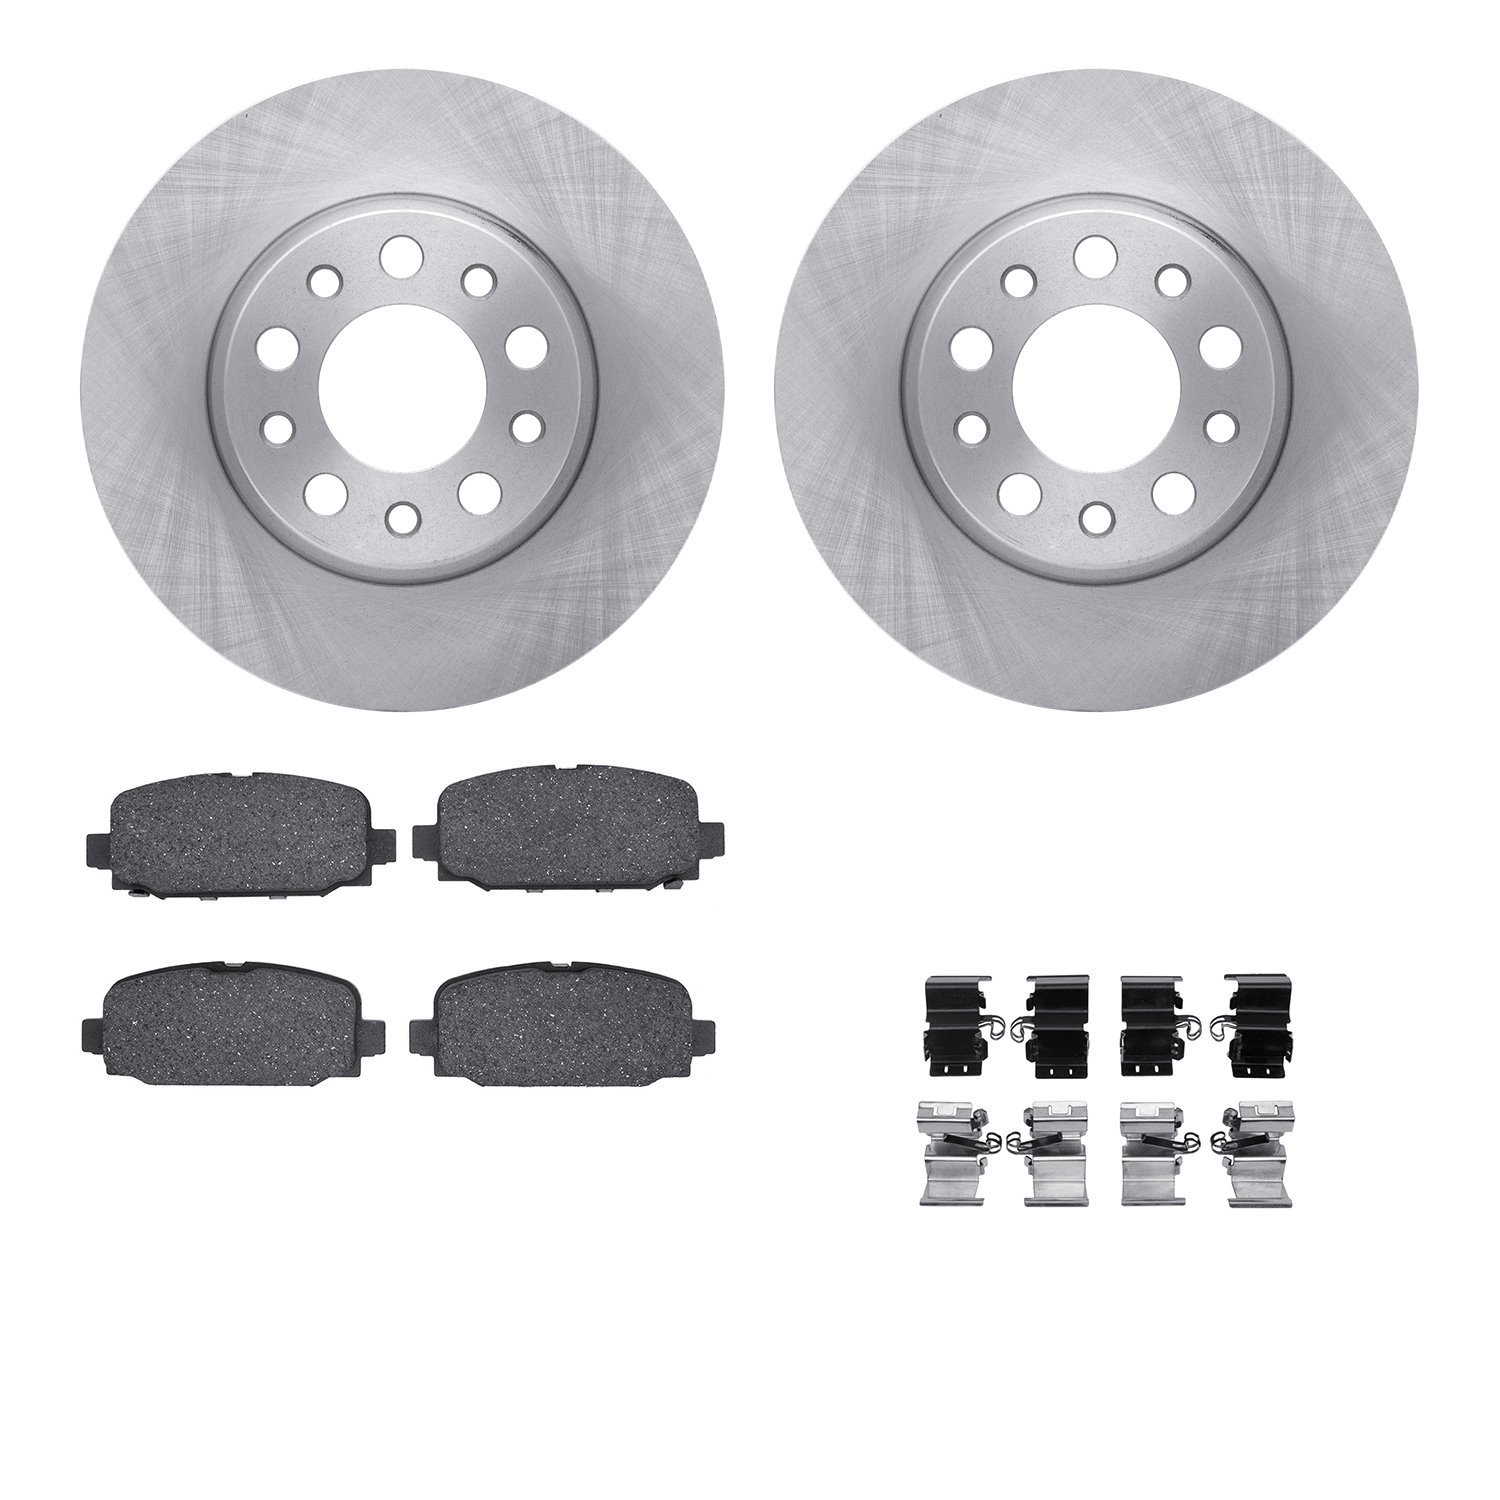 6312-42056 Brake Rotors with 3000-Series Ceramic Brake Pads Kit with Hardware, Fits Select Mopar, Position: Rear